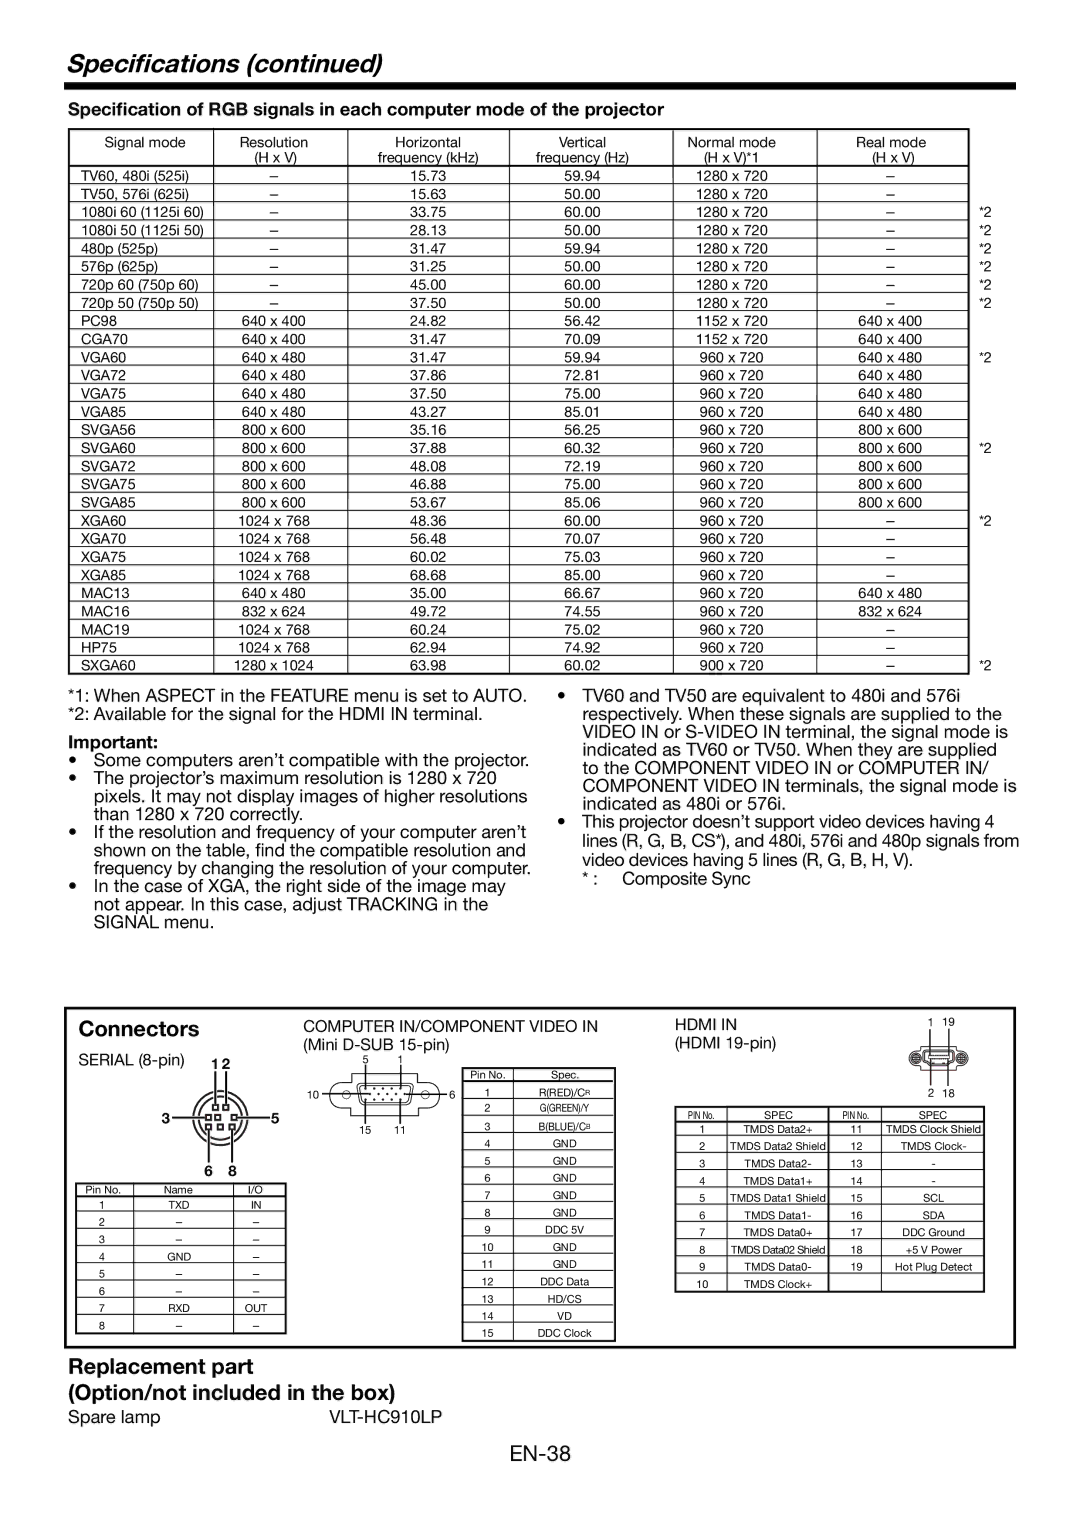 Mitsubishi Electronics HC1500 Speciﬁcations, Connectors, Replacement part Option/not included in the box, VLT-HC910LP 